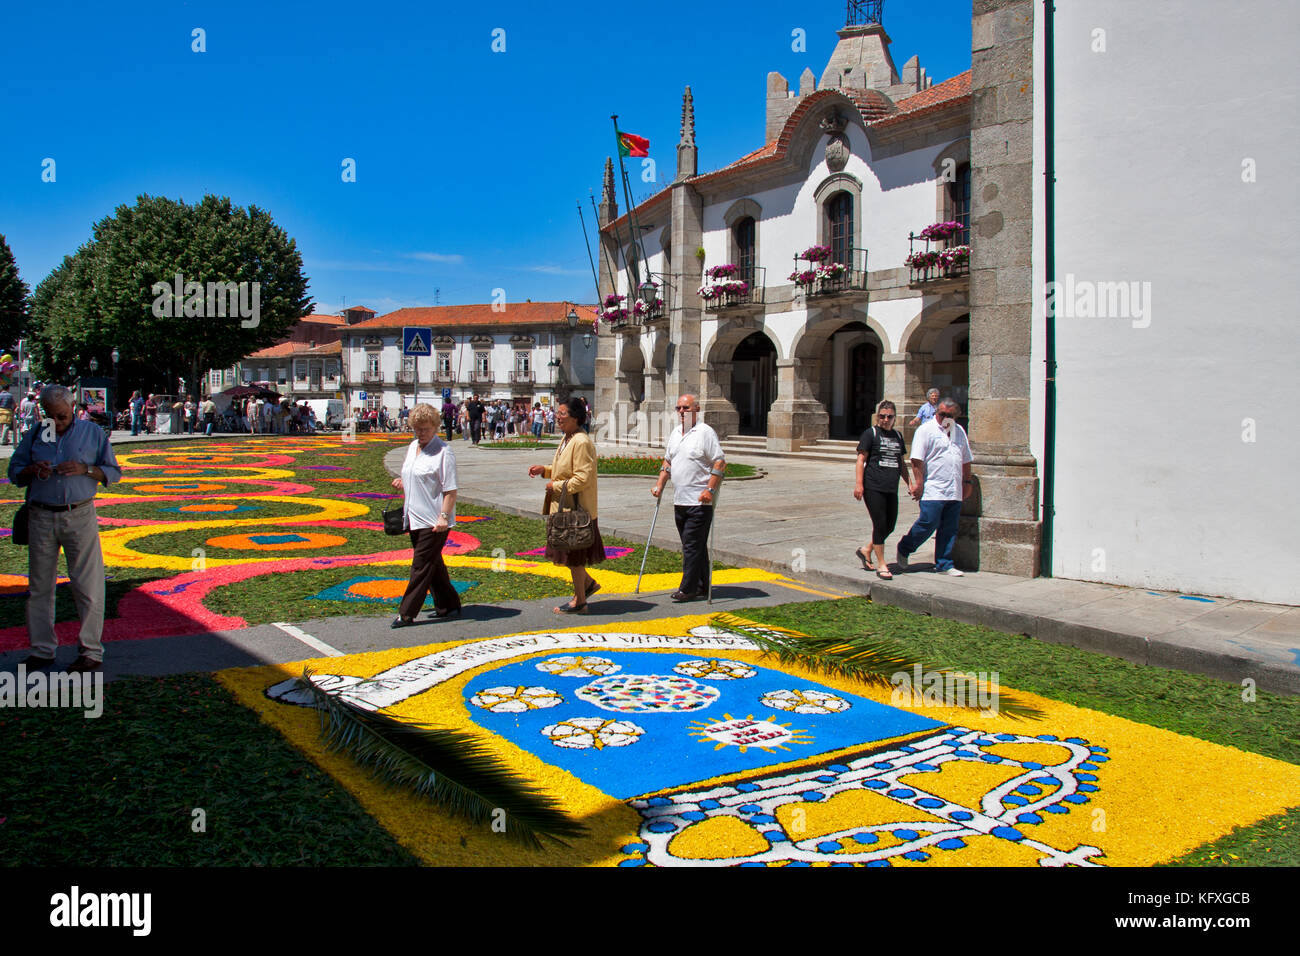 Caminha, Portugal, celebrations of the religious holiday of Corpus Christi by paving several of its main streets with flowers, tapetes de Flores Stock Photo